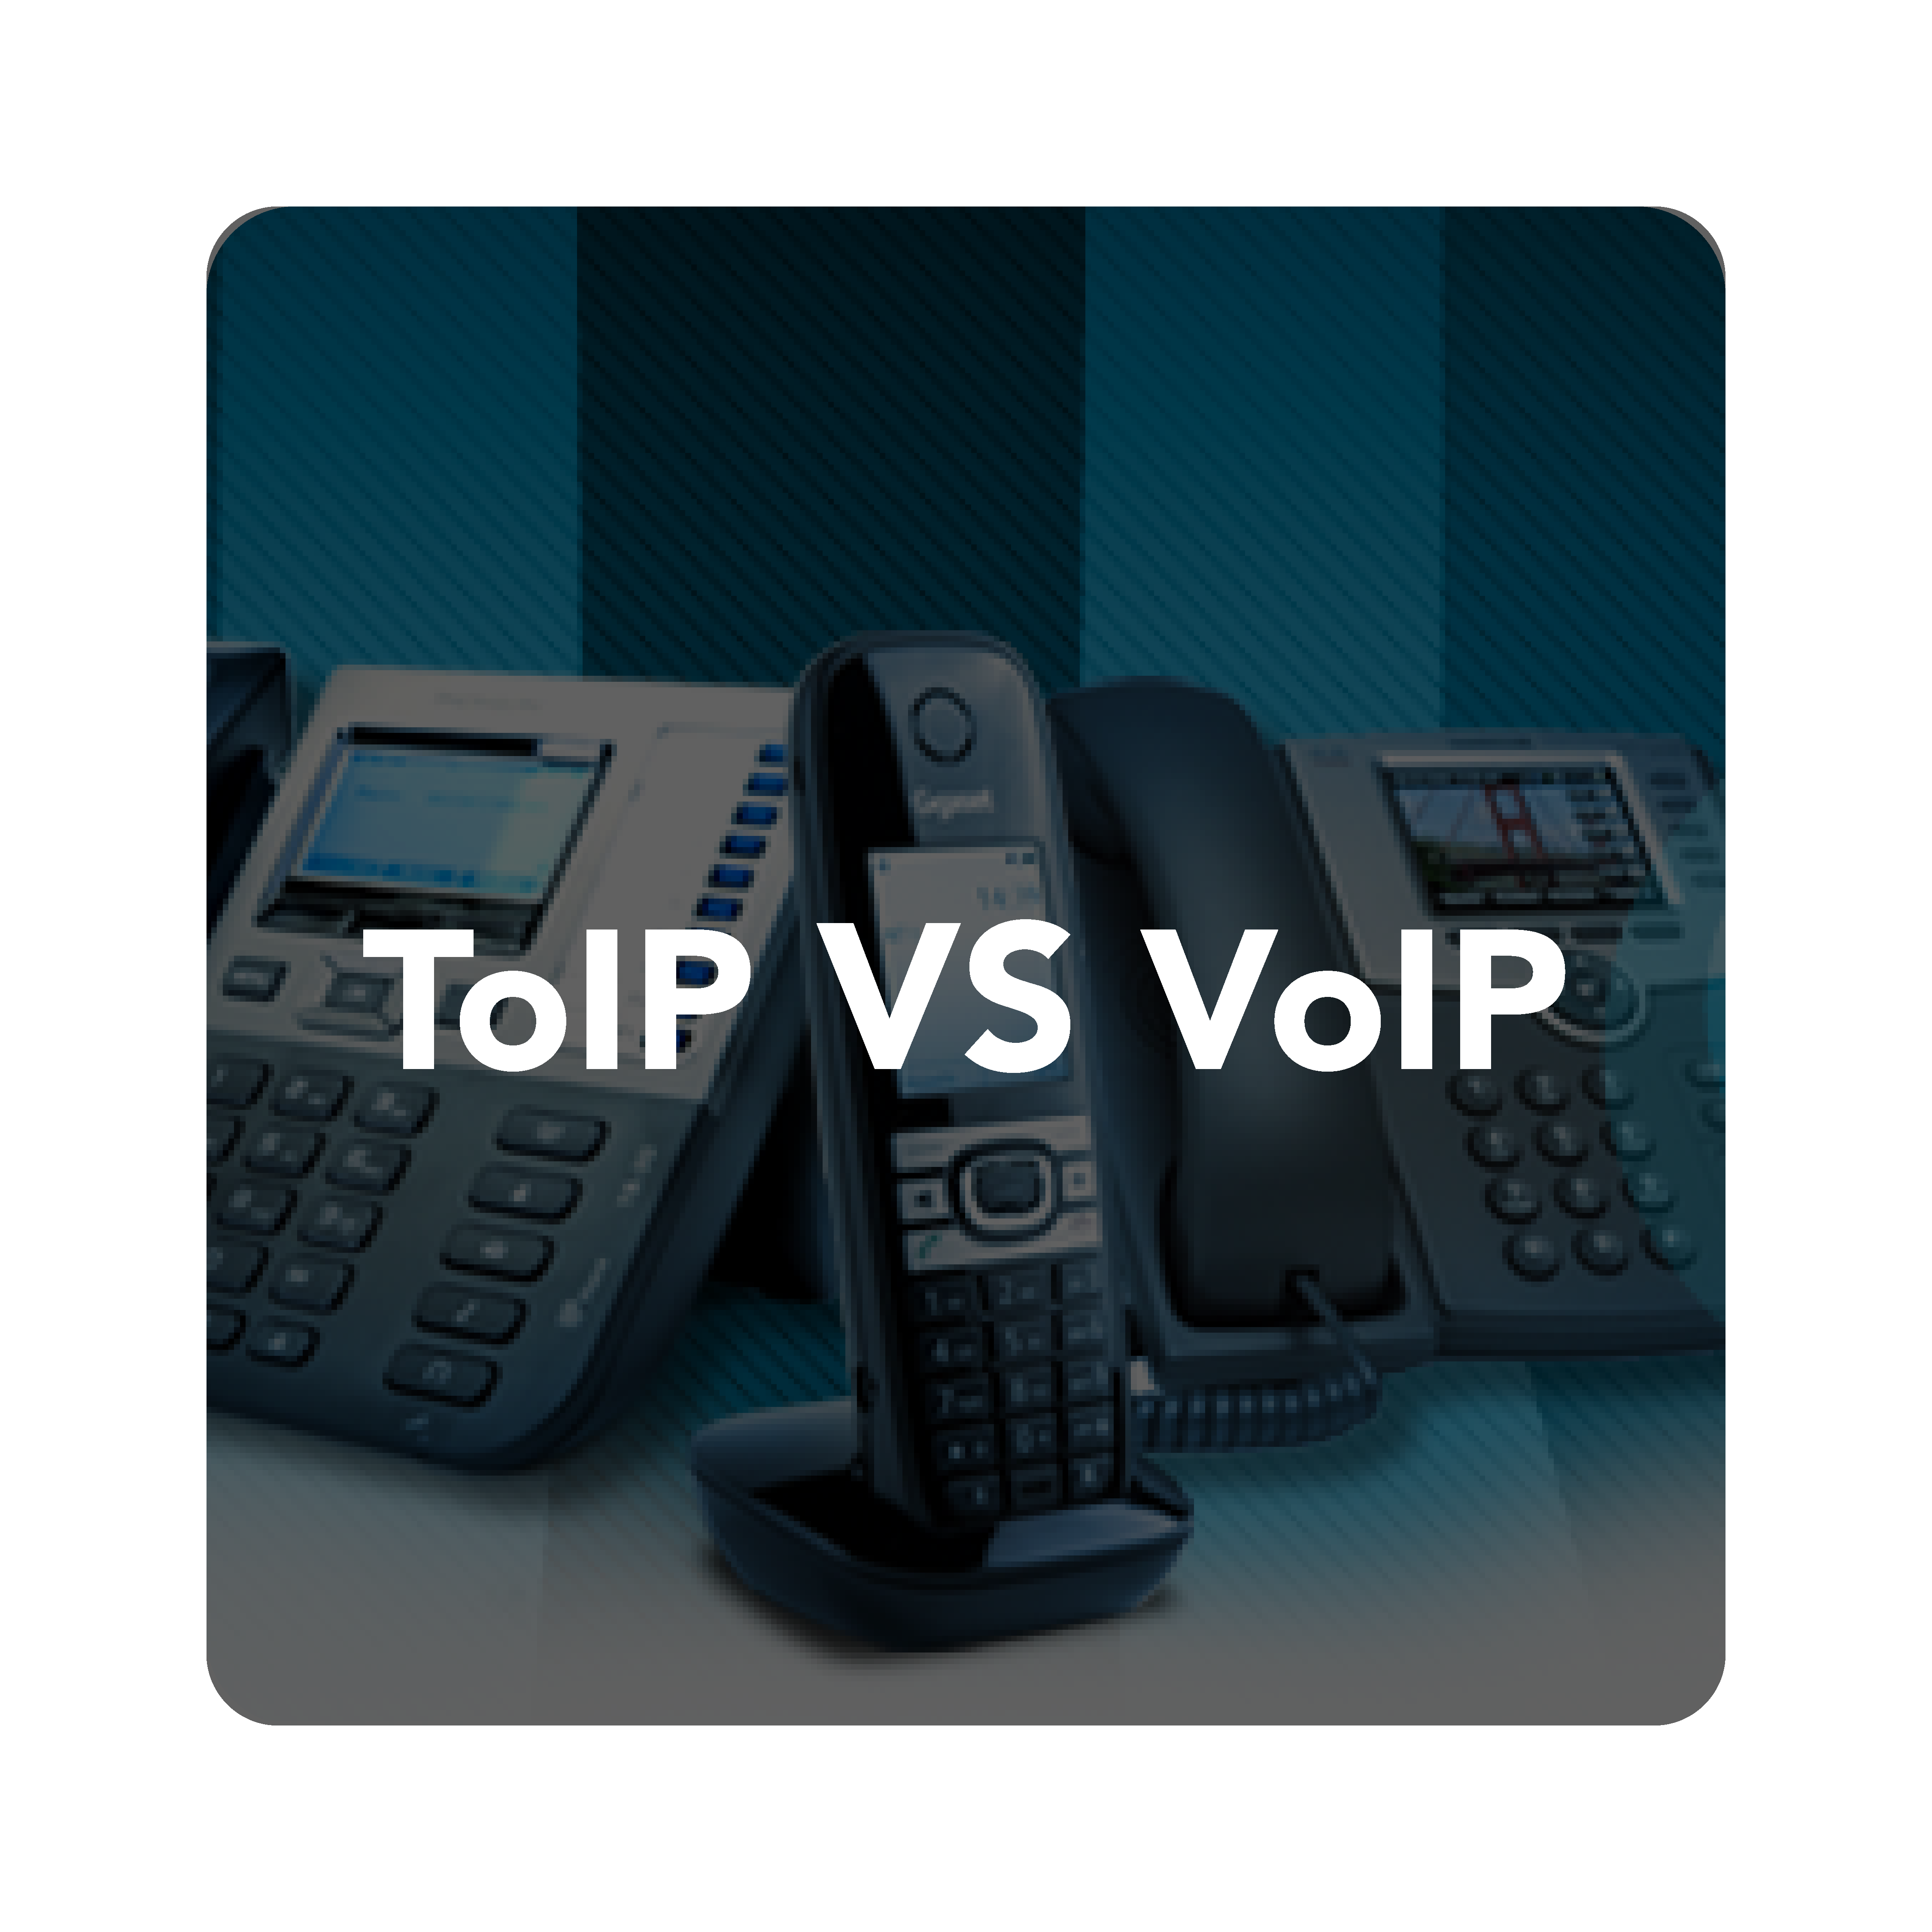 VoIP VS ToIP